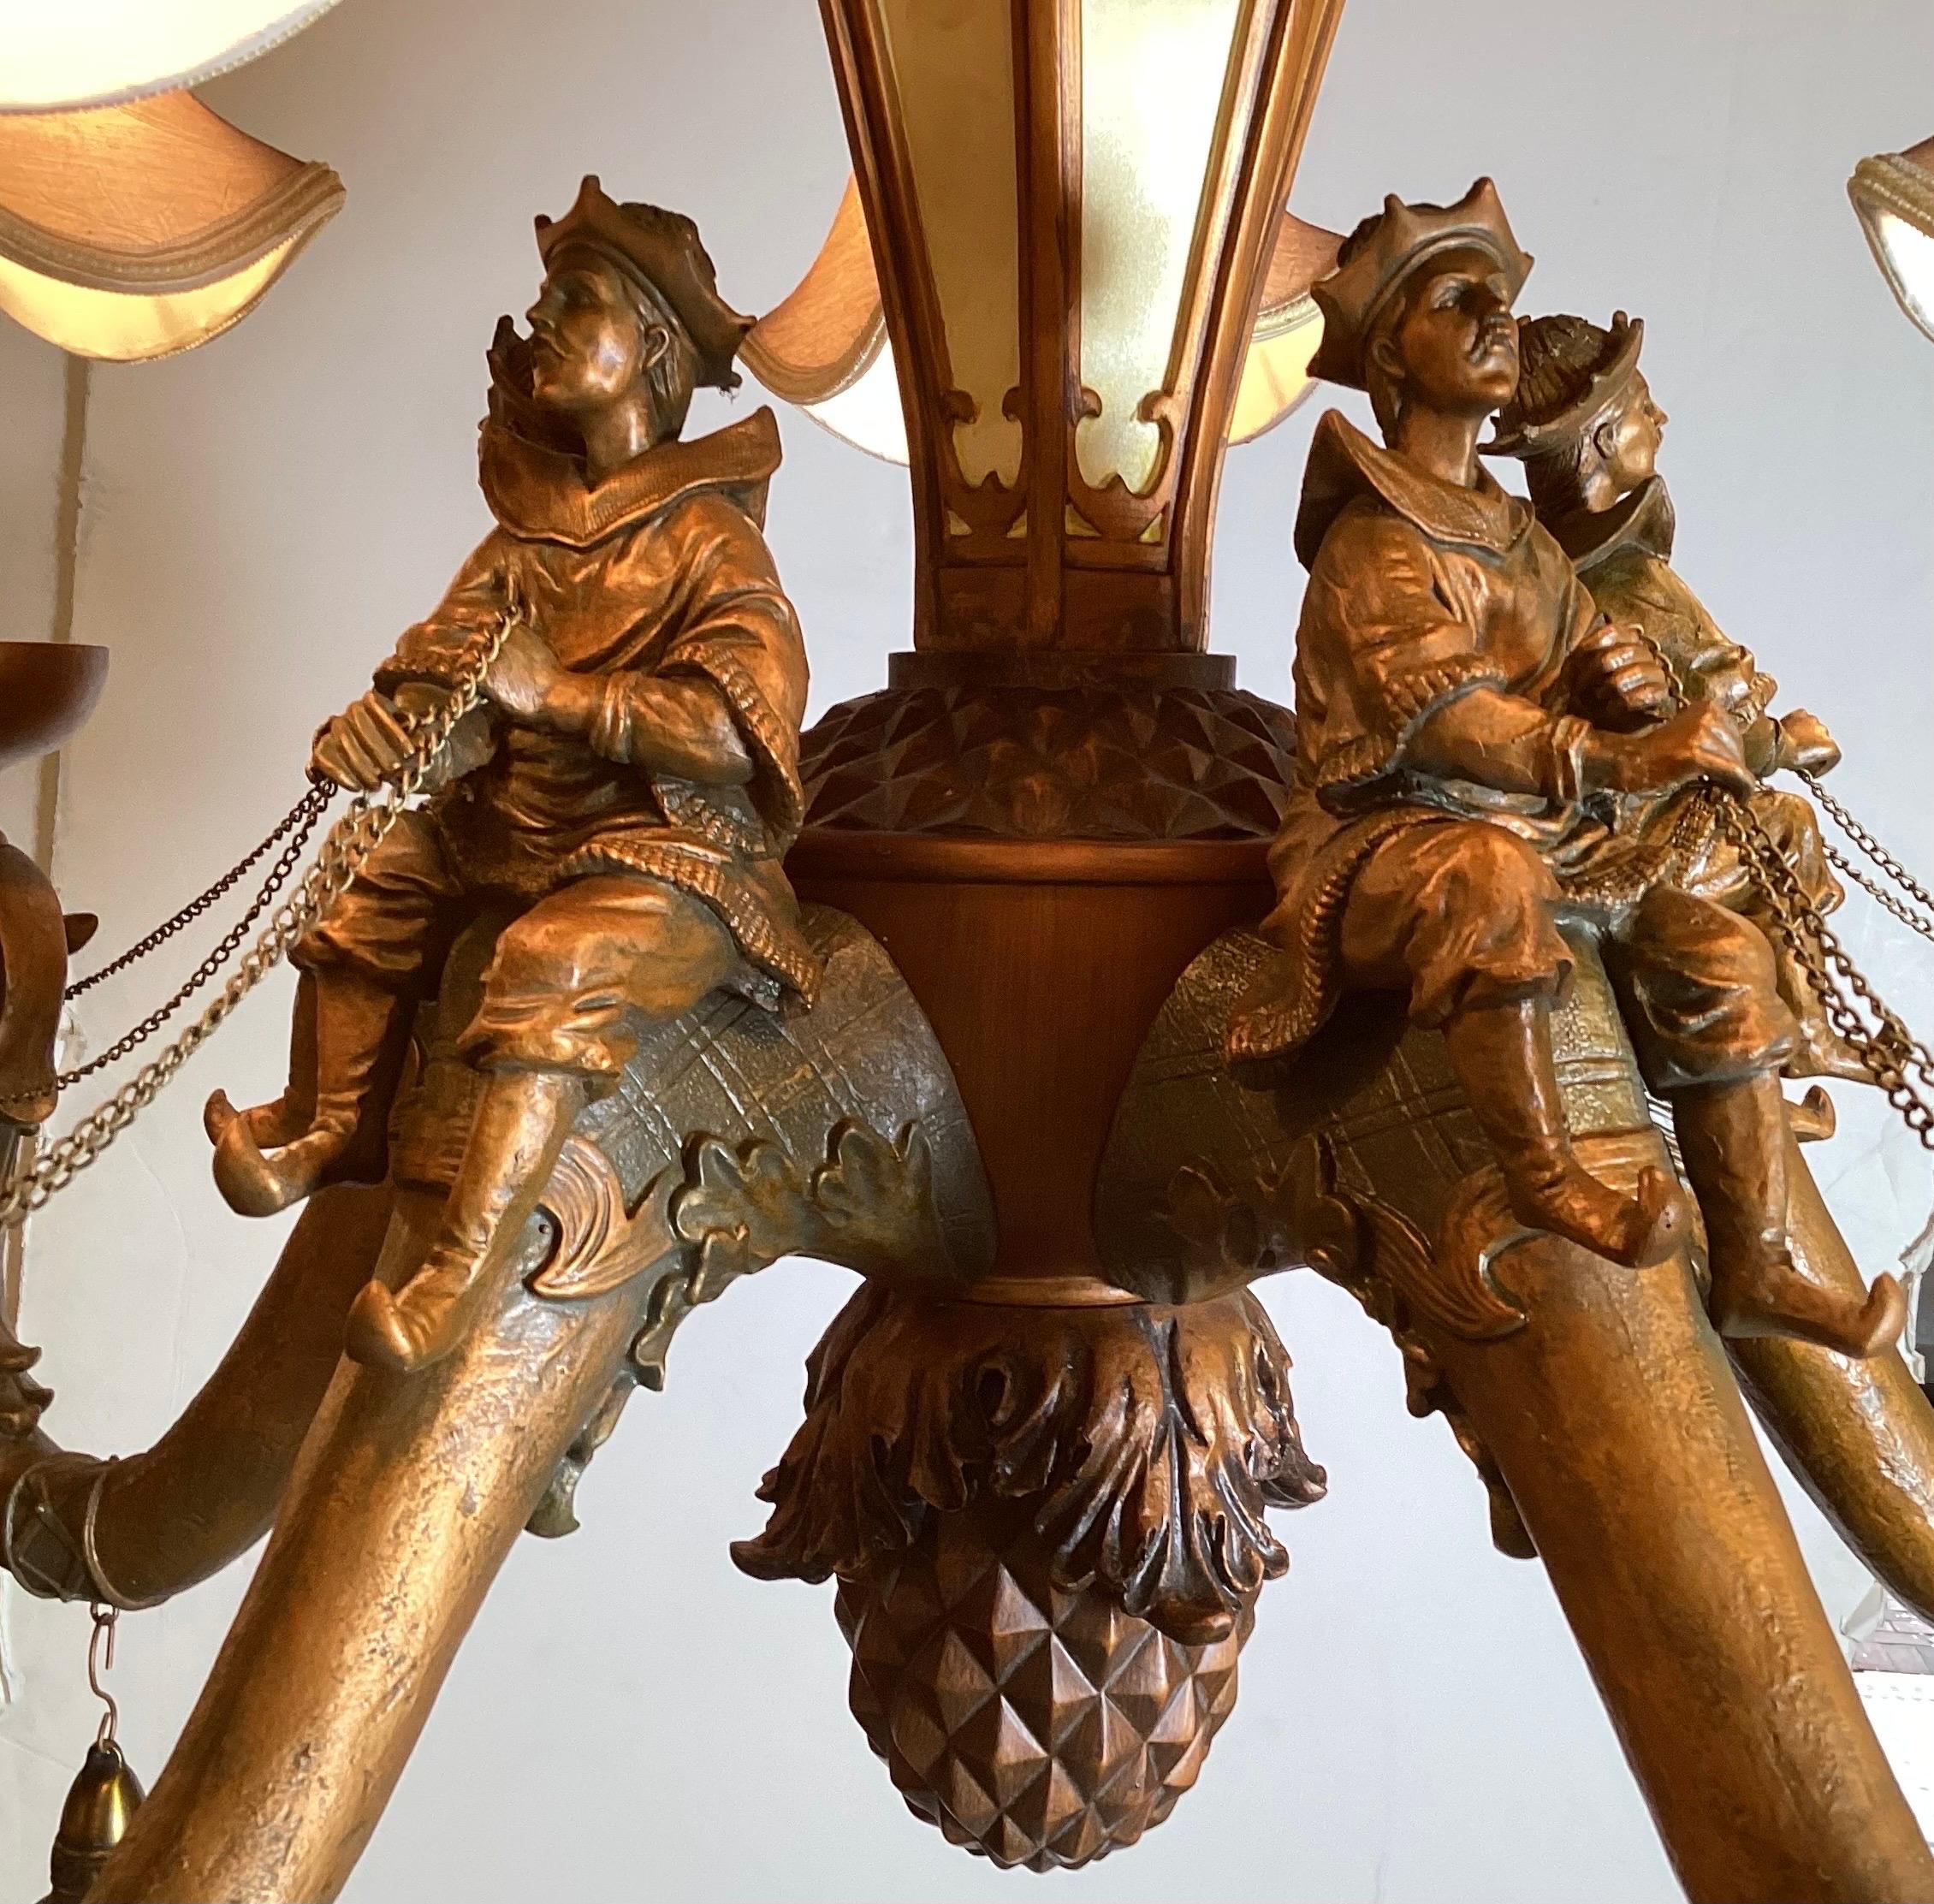 Mid-20th Century Decorative Chinoiserie Chandelier with Figures riding camels. Shades are pagoda shaped.  Very different and cool chandelier!
Chandelier and shades are in very good condition.